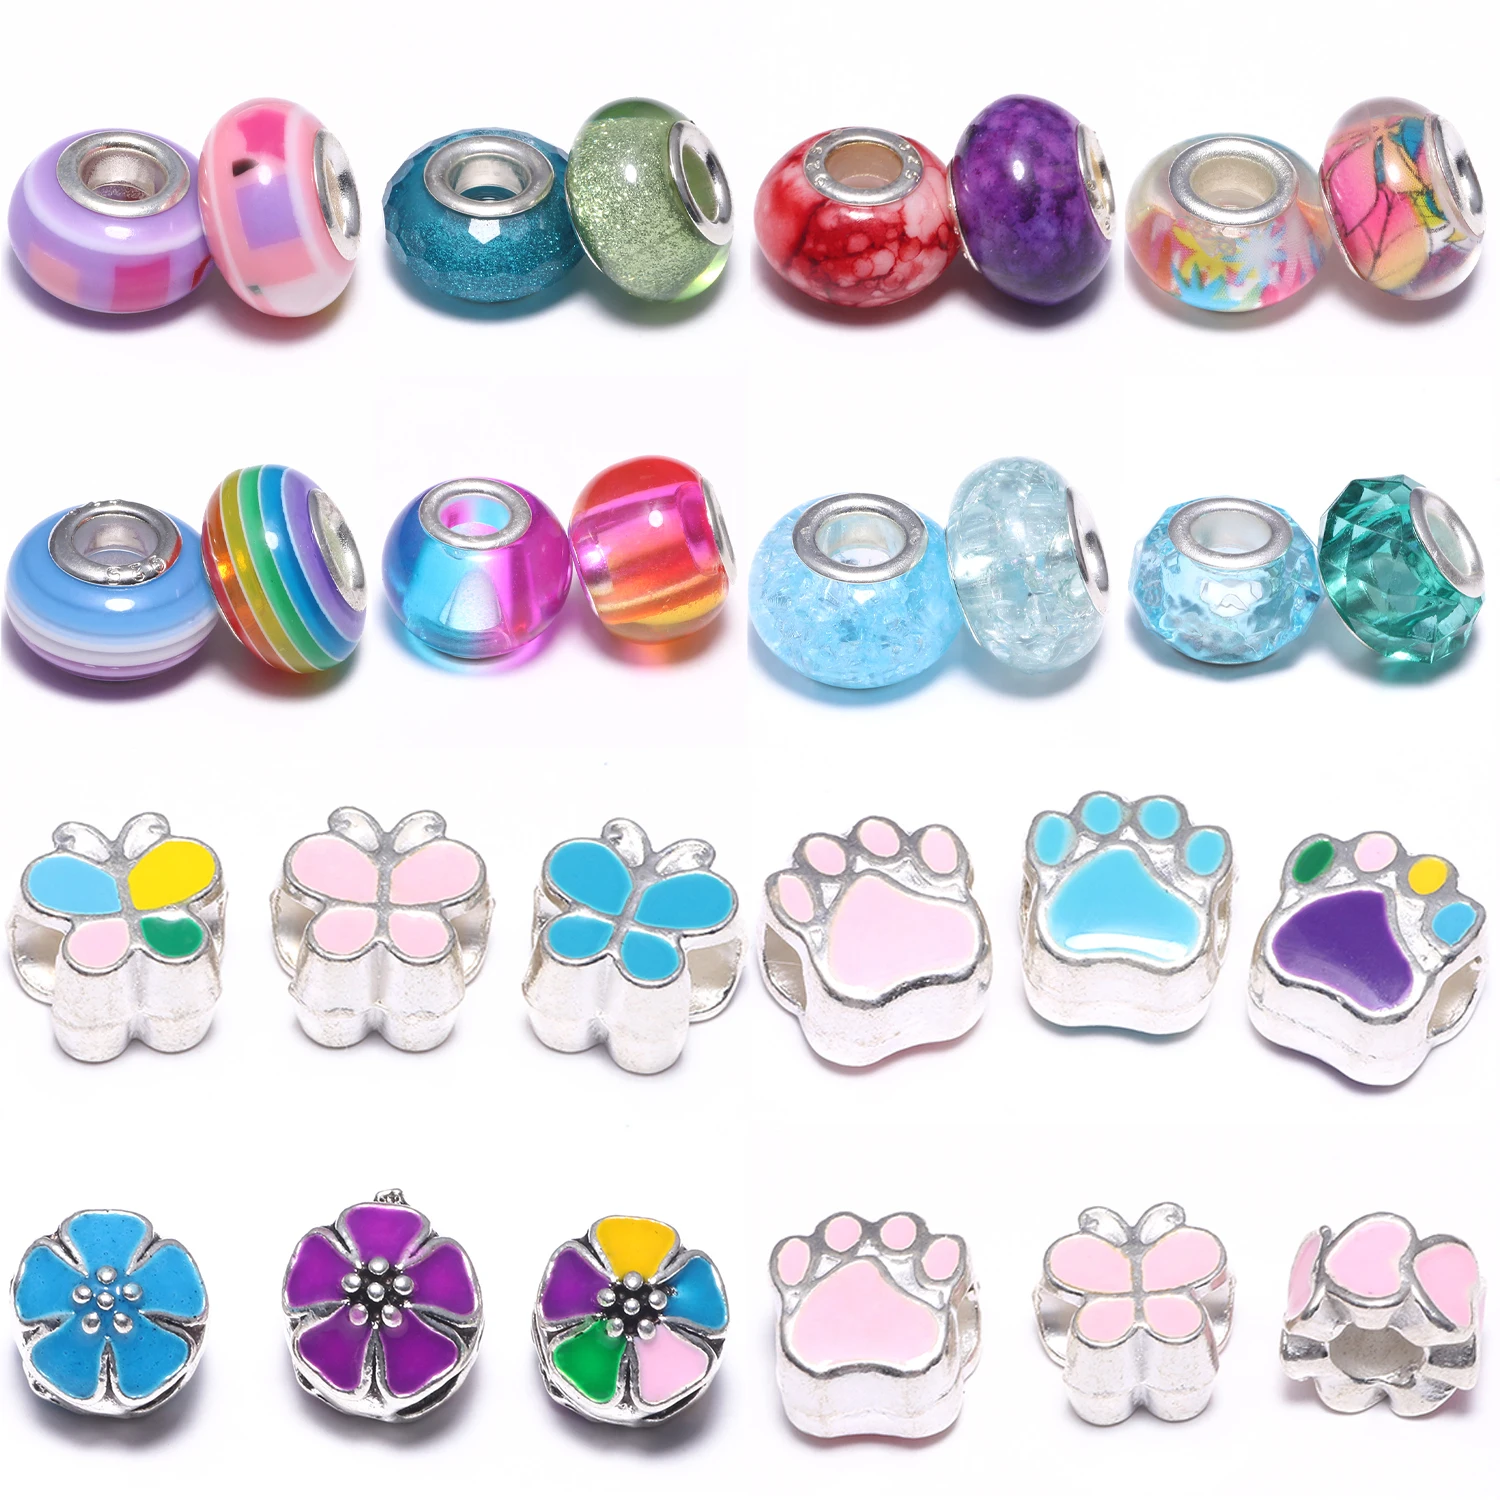 

10pcs Mixed Big Hole Spacer Bead Crystal Resin Murano Charm Beads For Jewelry Making DIY Pandora Bracelet Necklace Bead Supplies